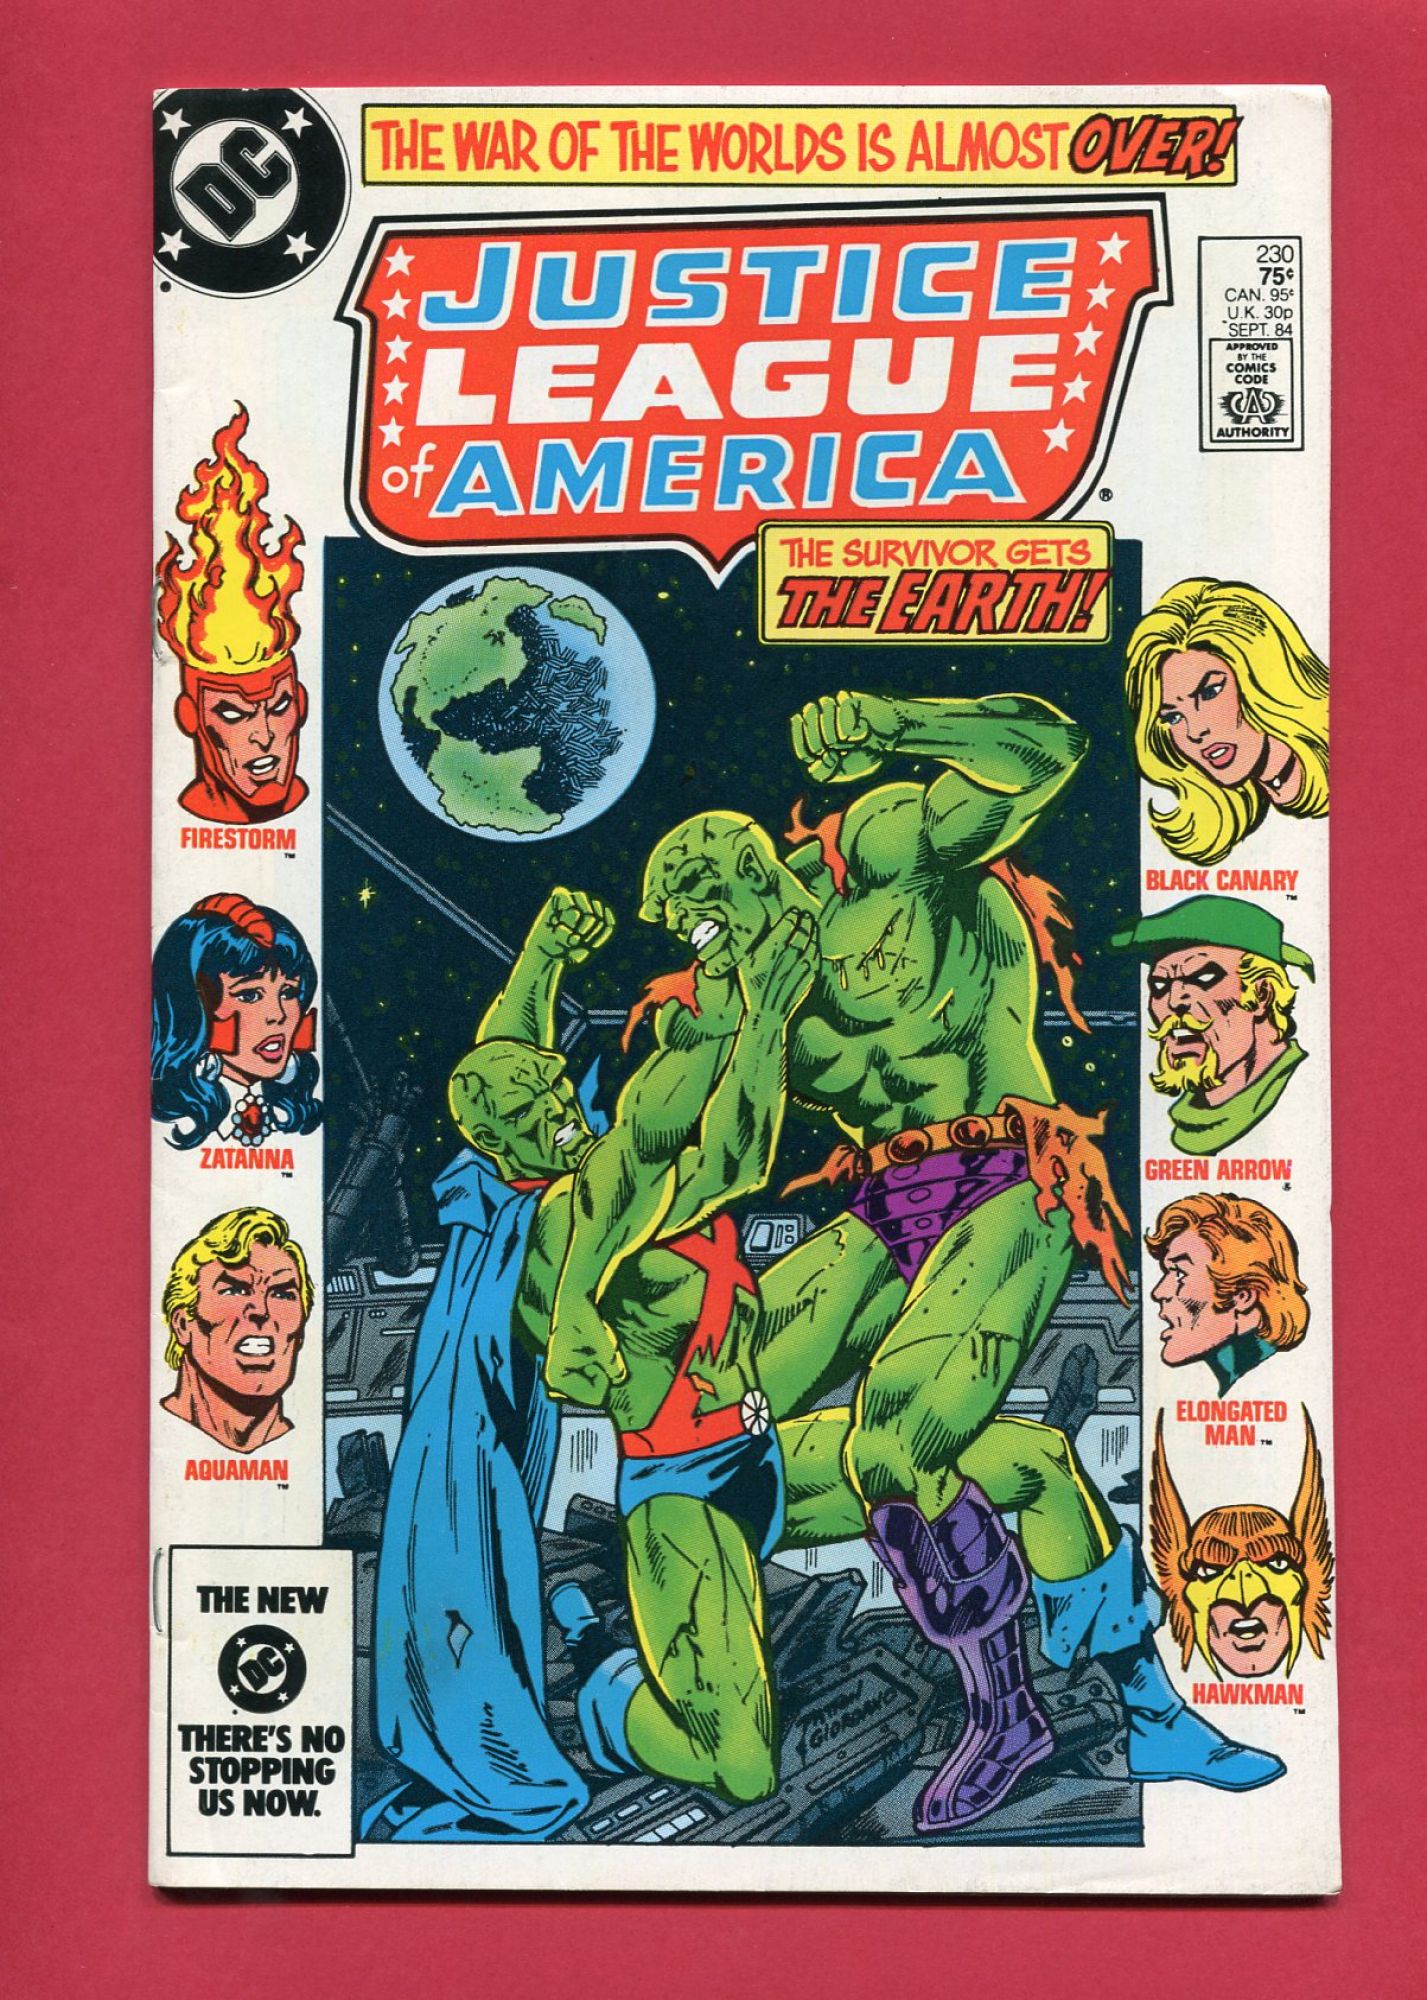 Justice League of America (Volume 1 1960) #230, Sep 1984, 8.5 VF+